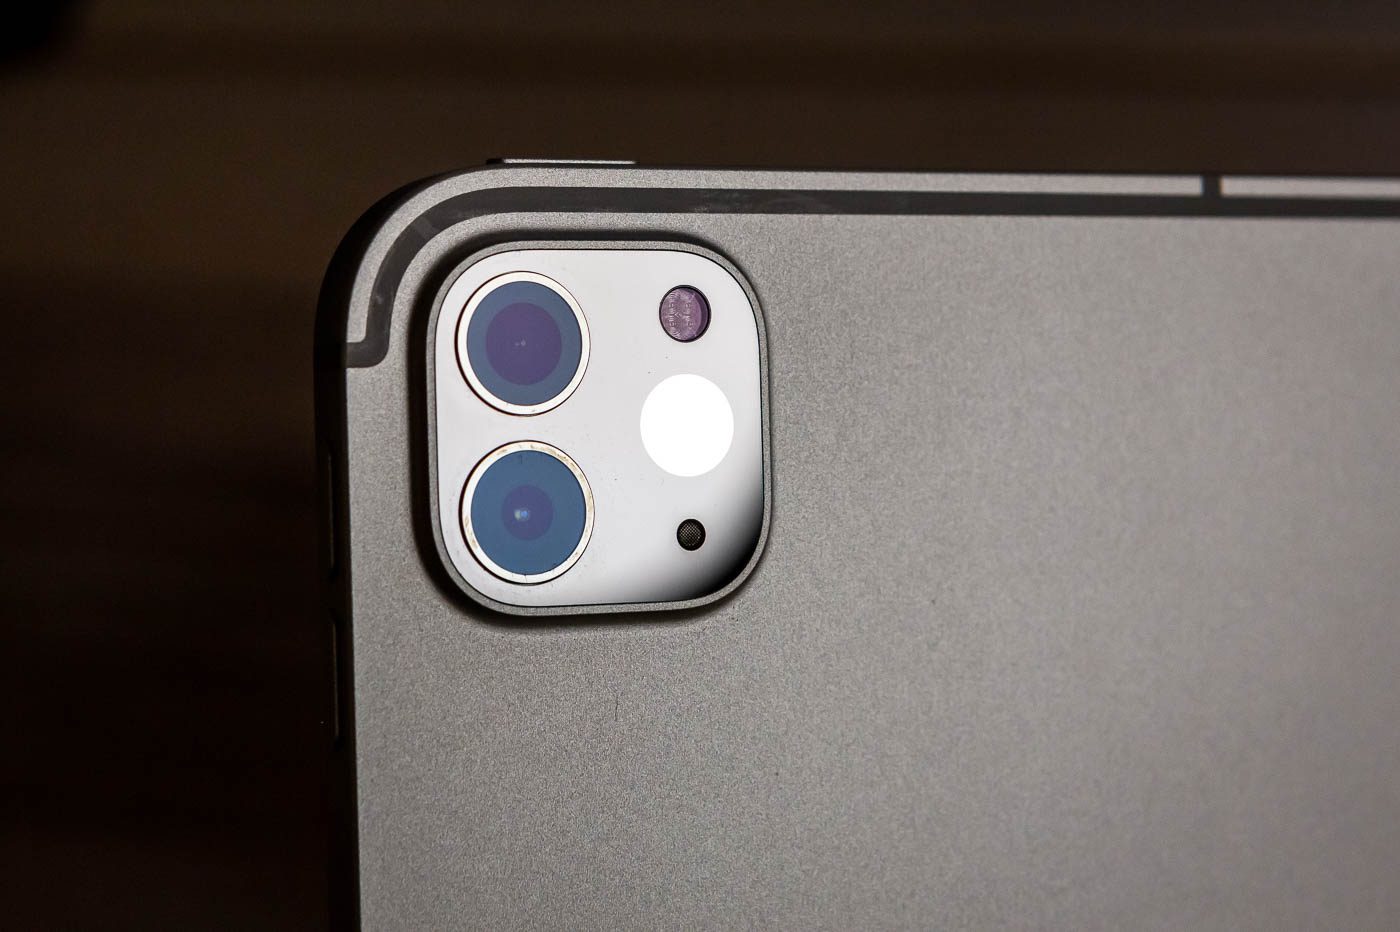 The iPad Pro still has two rear camera modules, along with a lidar.